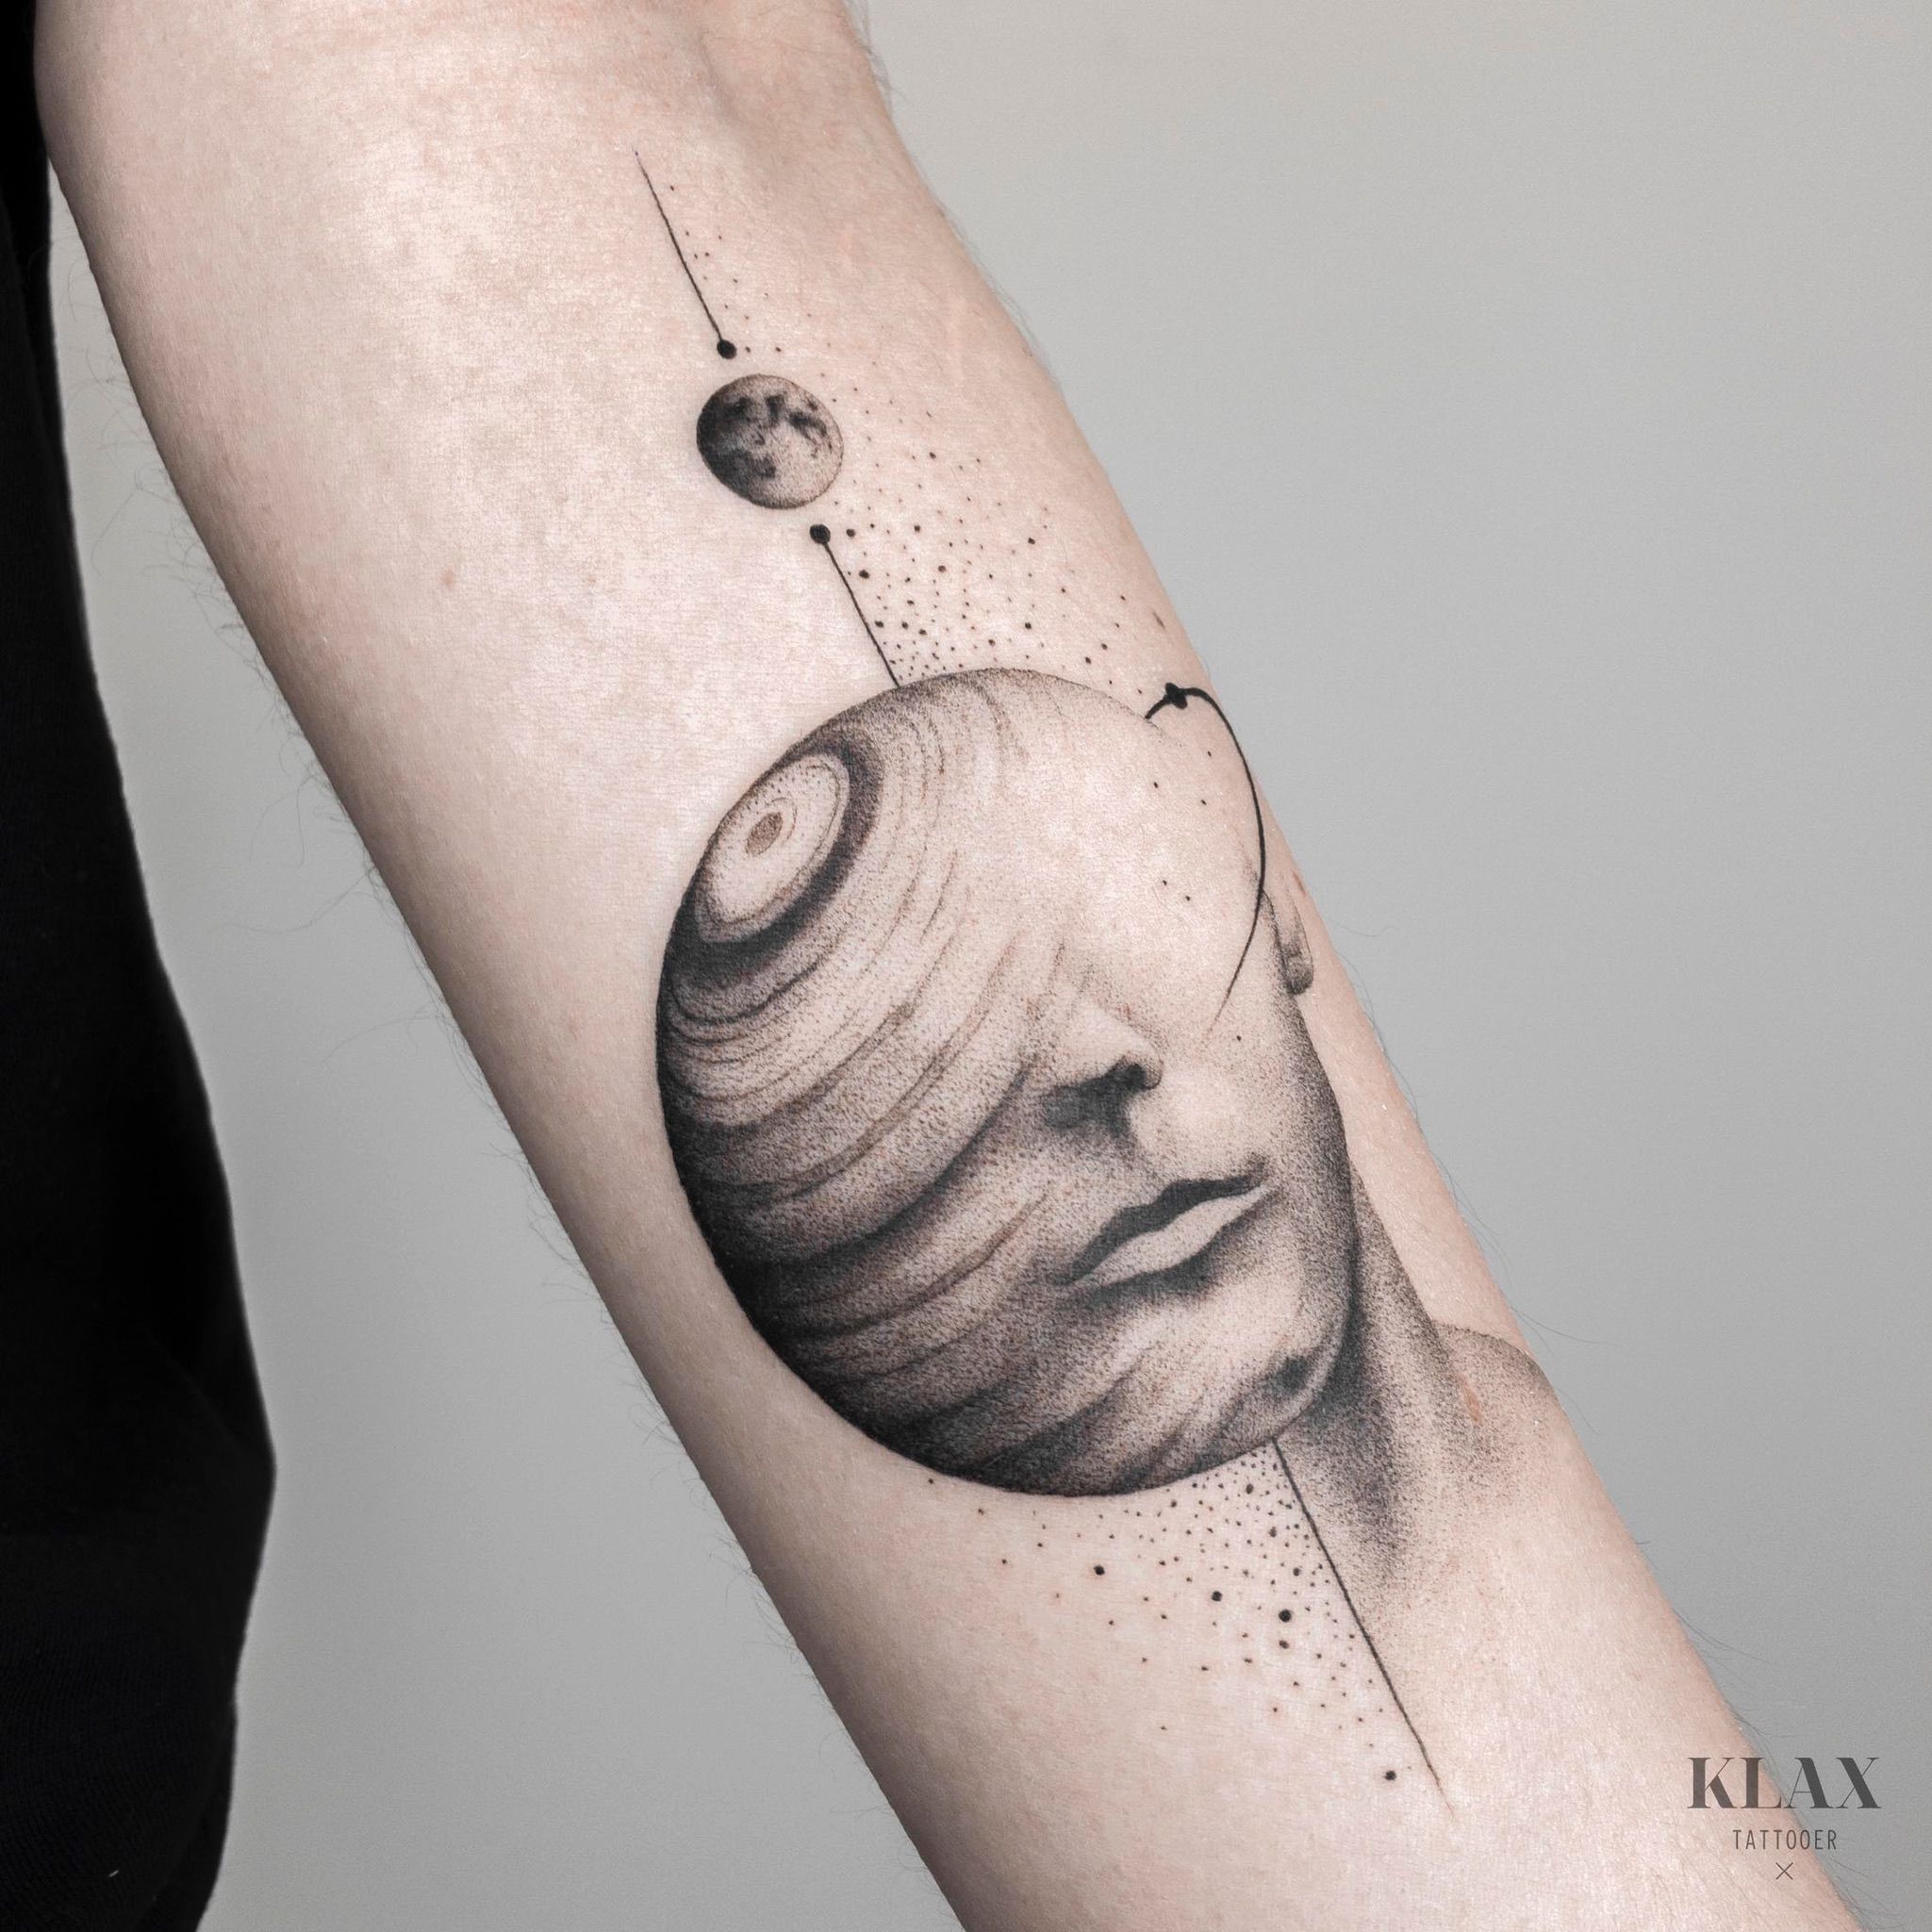 Dotwork space and planets tattoo - Tattoogrid.net